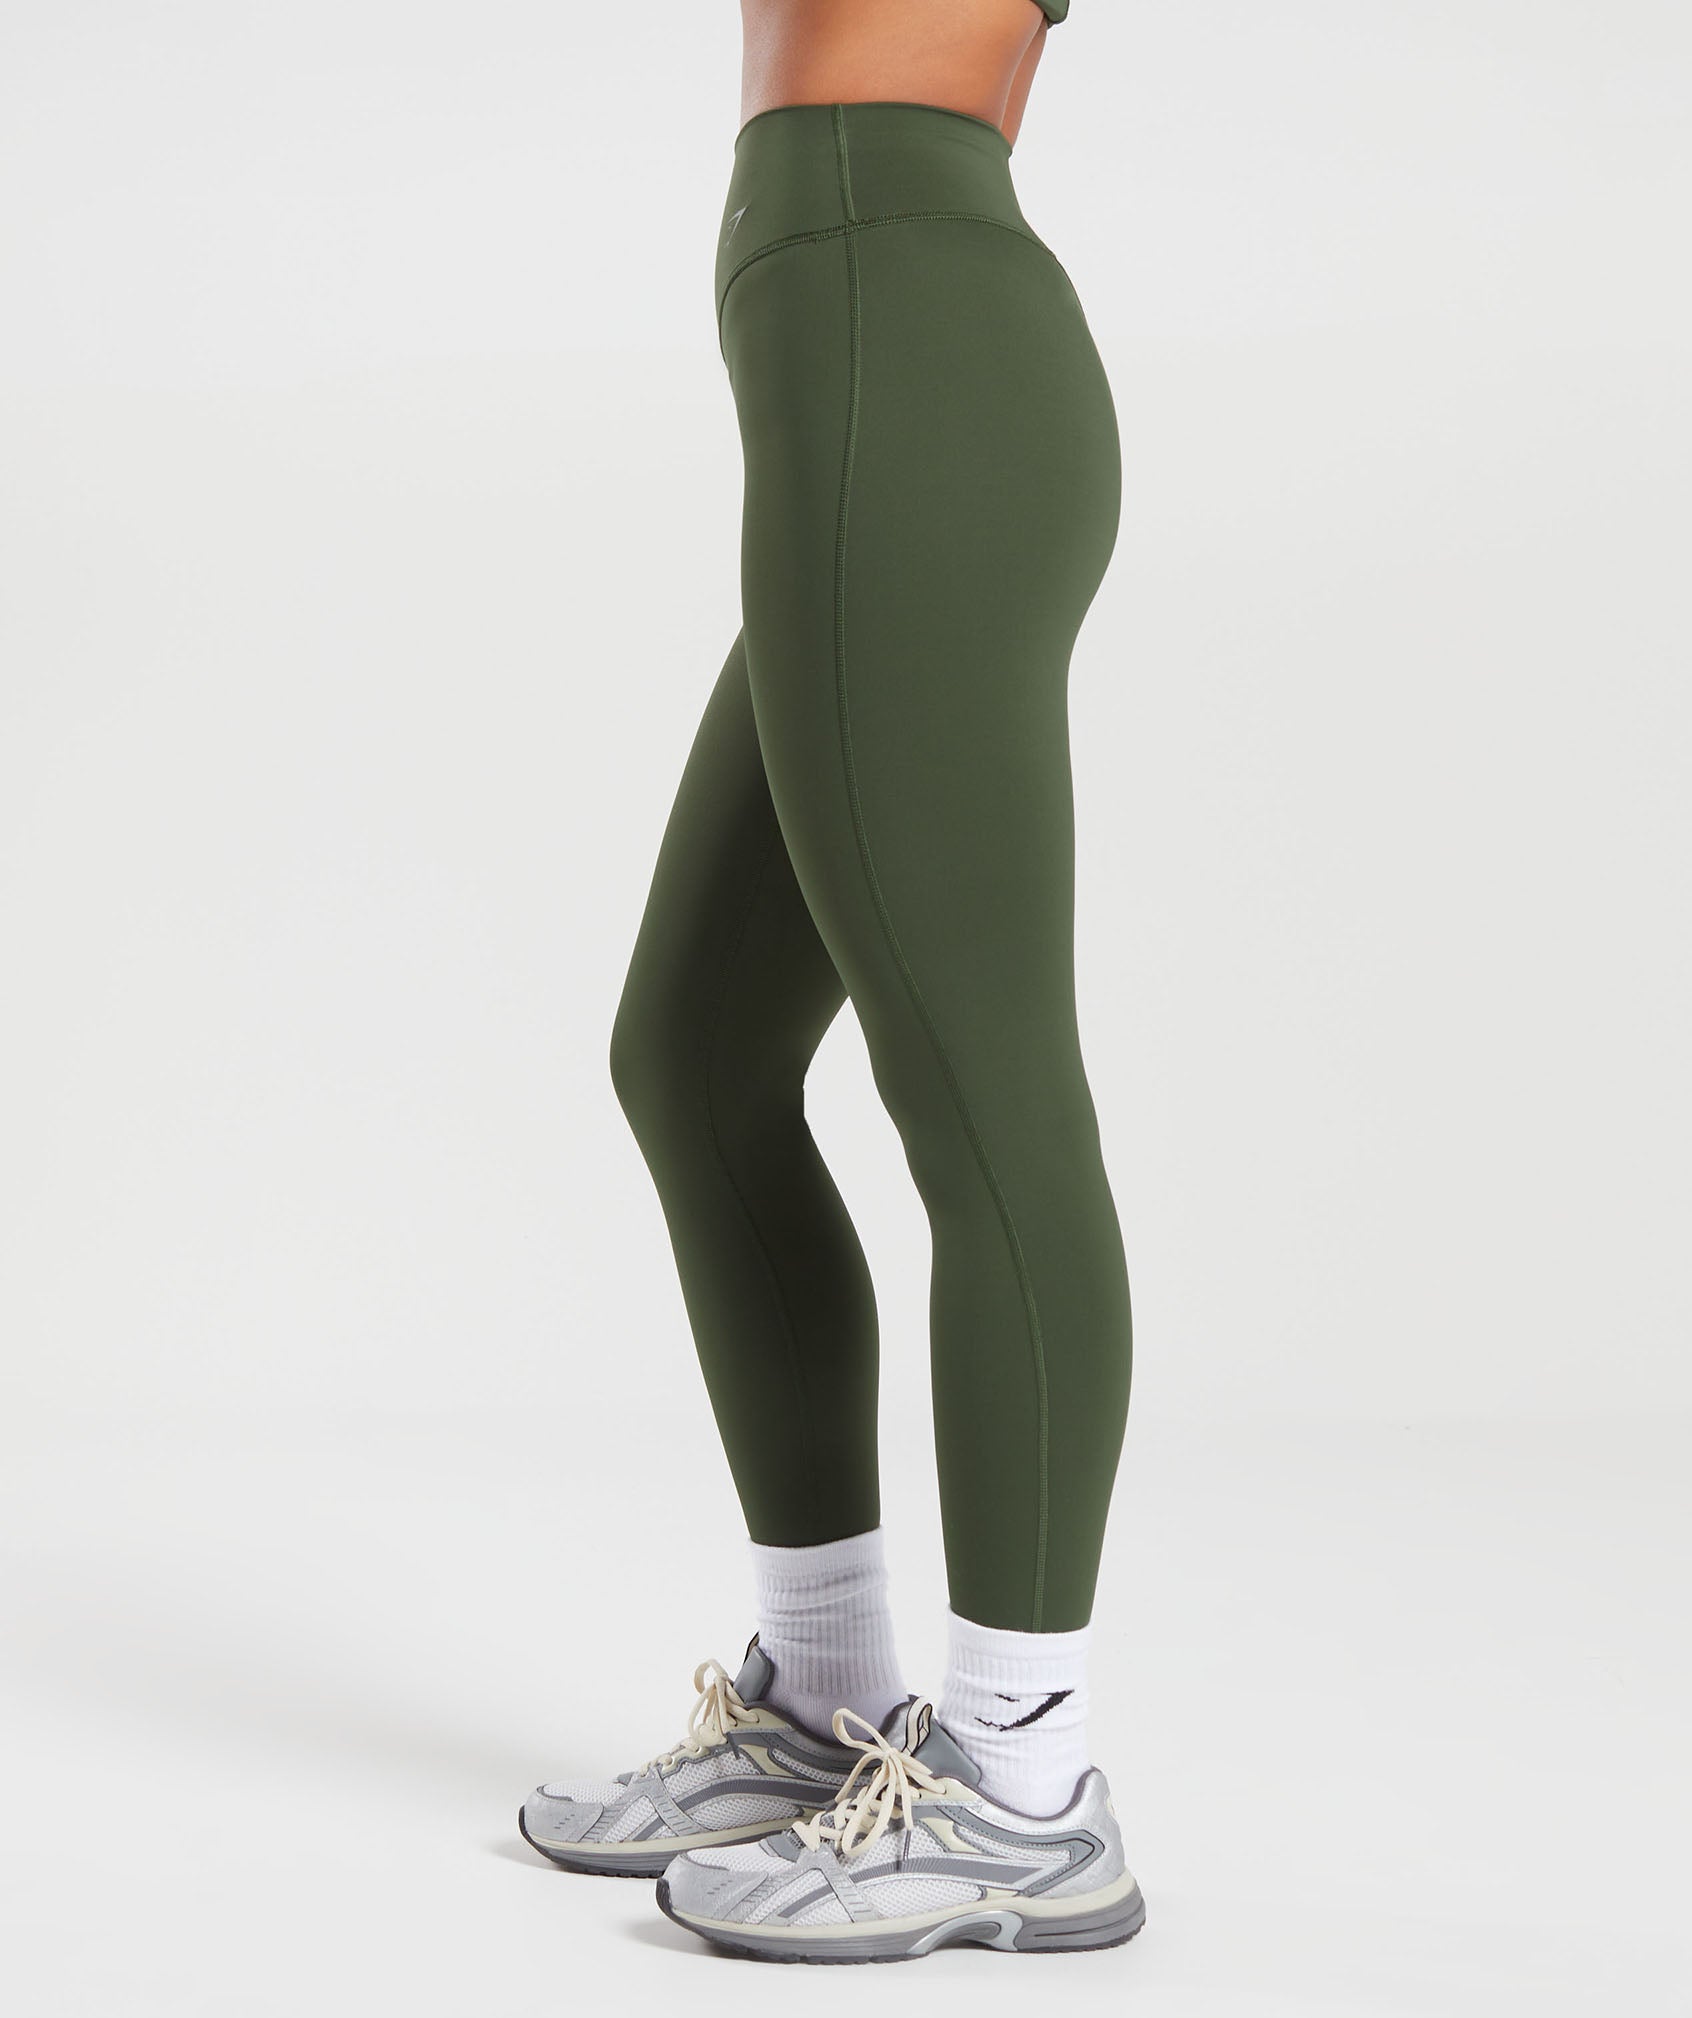 Elevate Leggings in Moss Olive - view 3